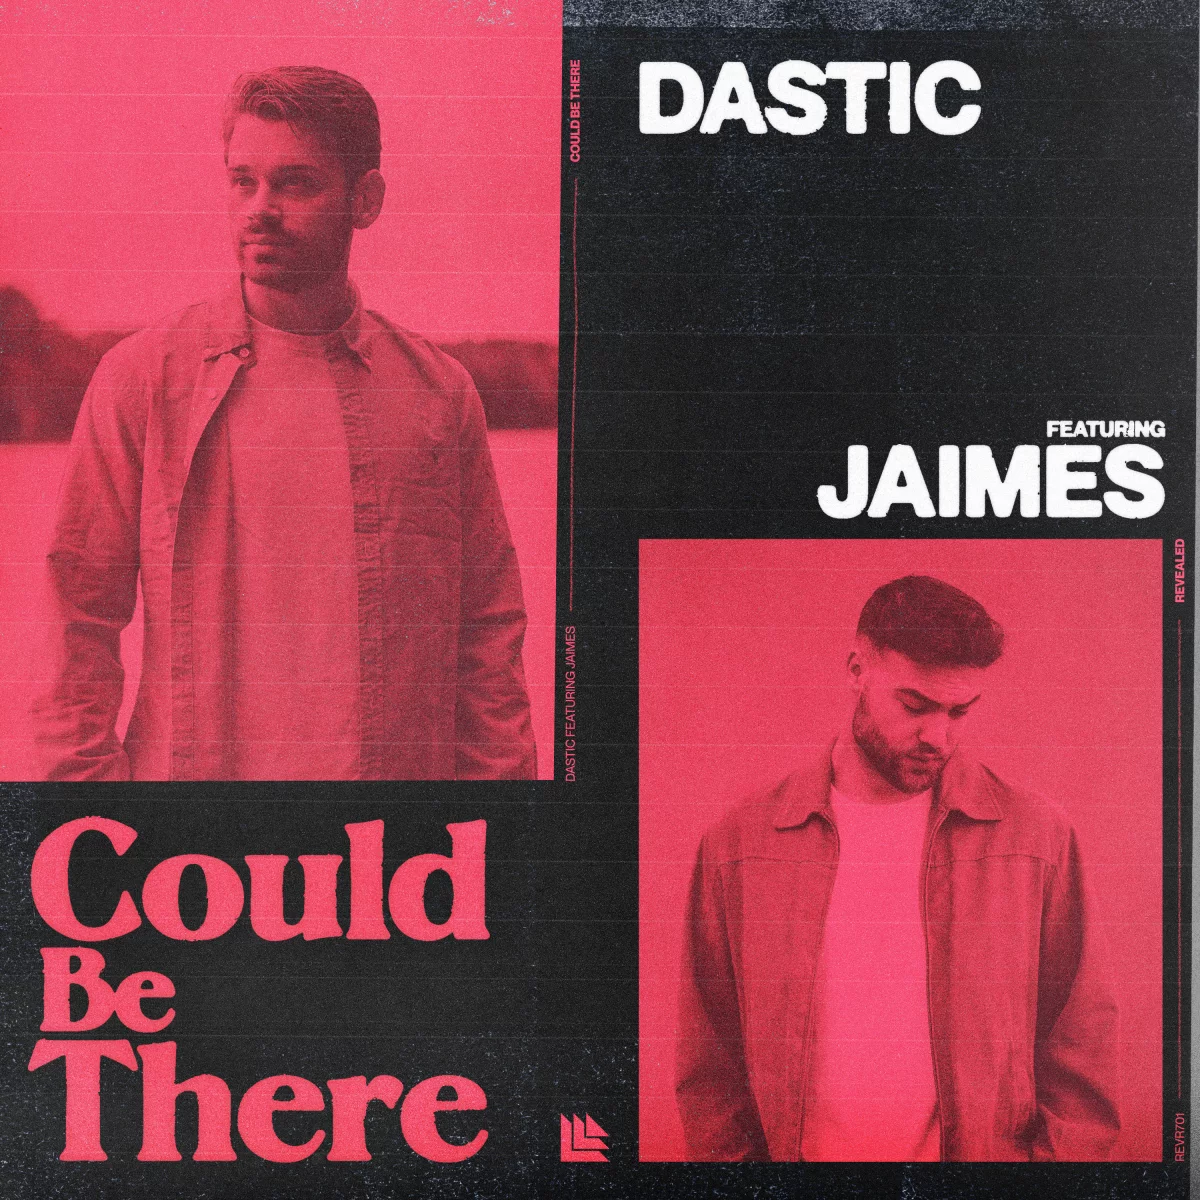 Could Be There - Dastic⁠ feat. Jaimes⁠